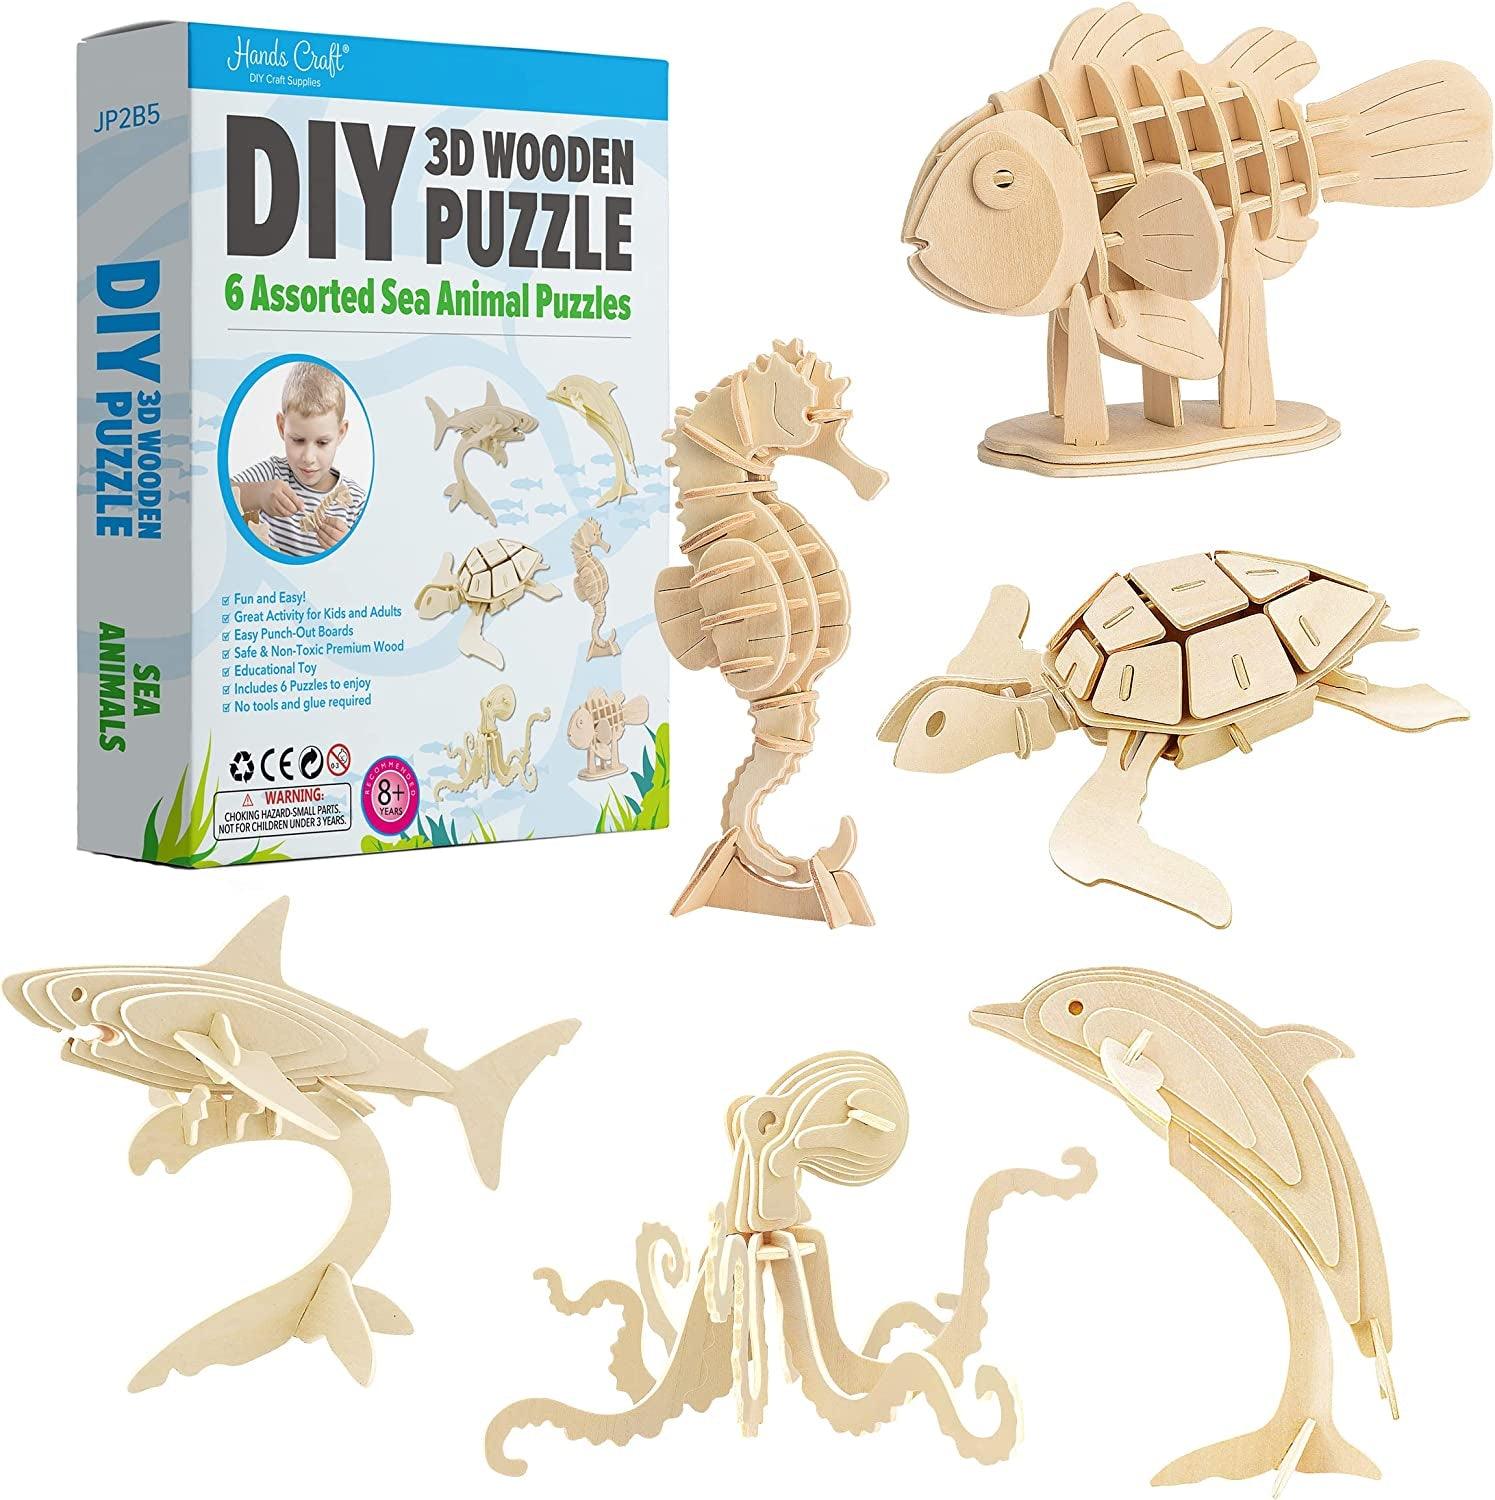 Craft DIY 3D Wooden Puzzle – 6 Assorted Sea Animals Bundle Pack Set Brain Teaser Puzzles Educational STEM Toy - WoodArtSupply